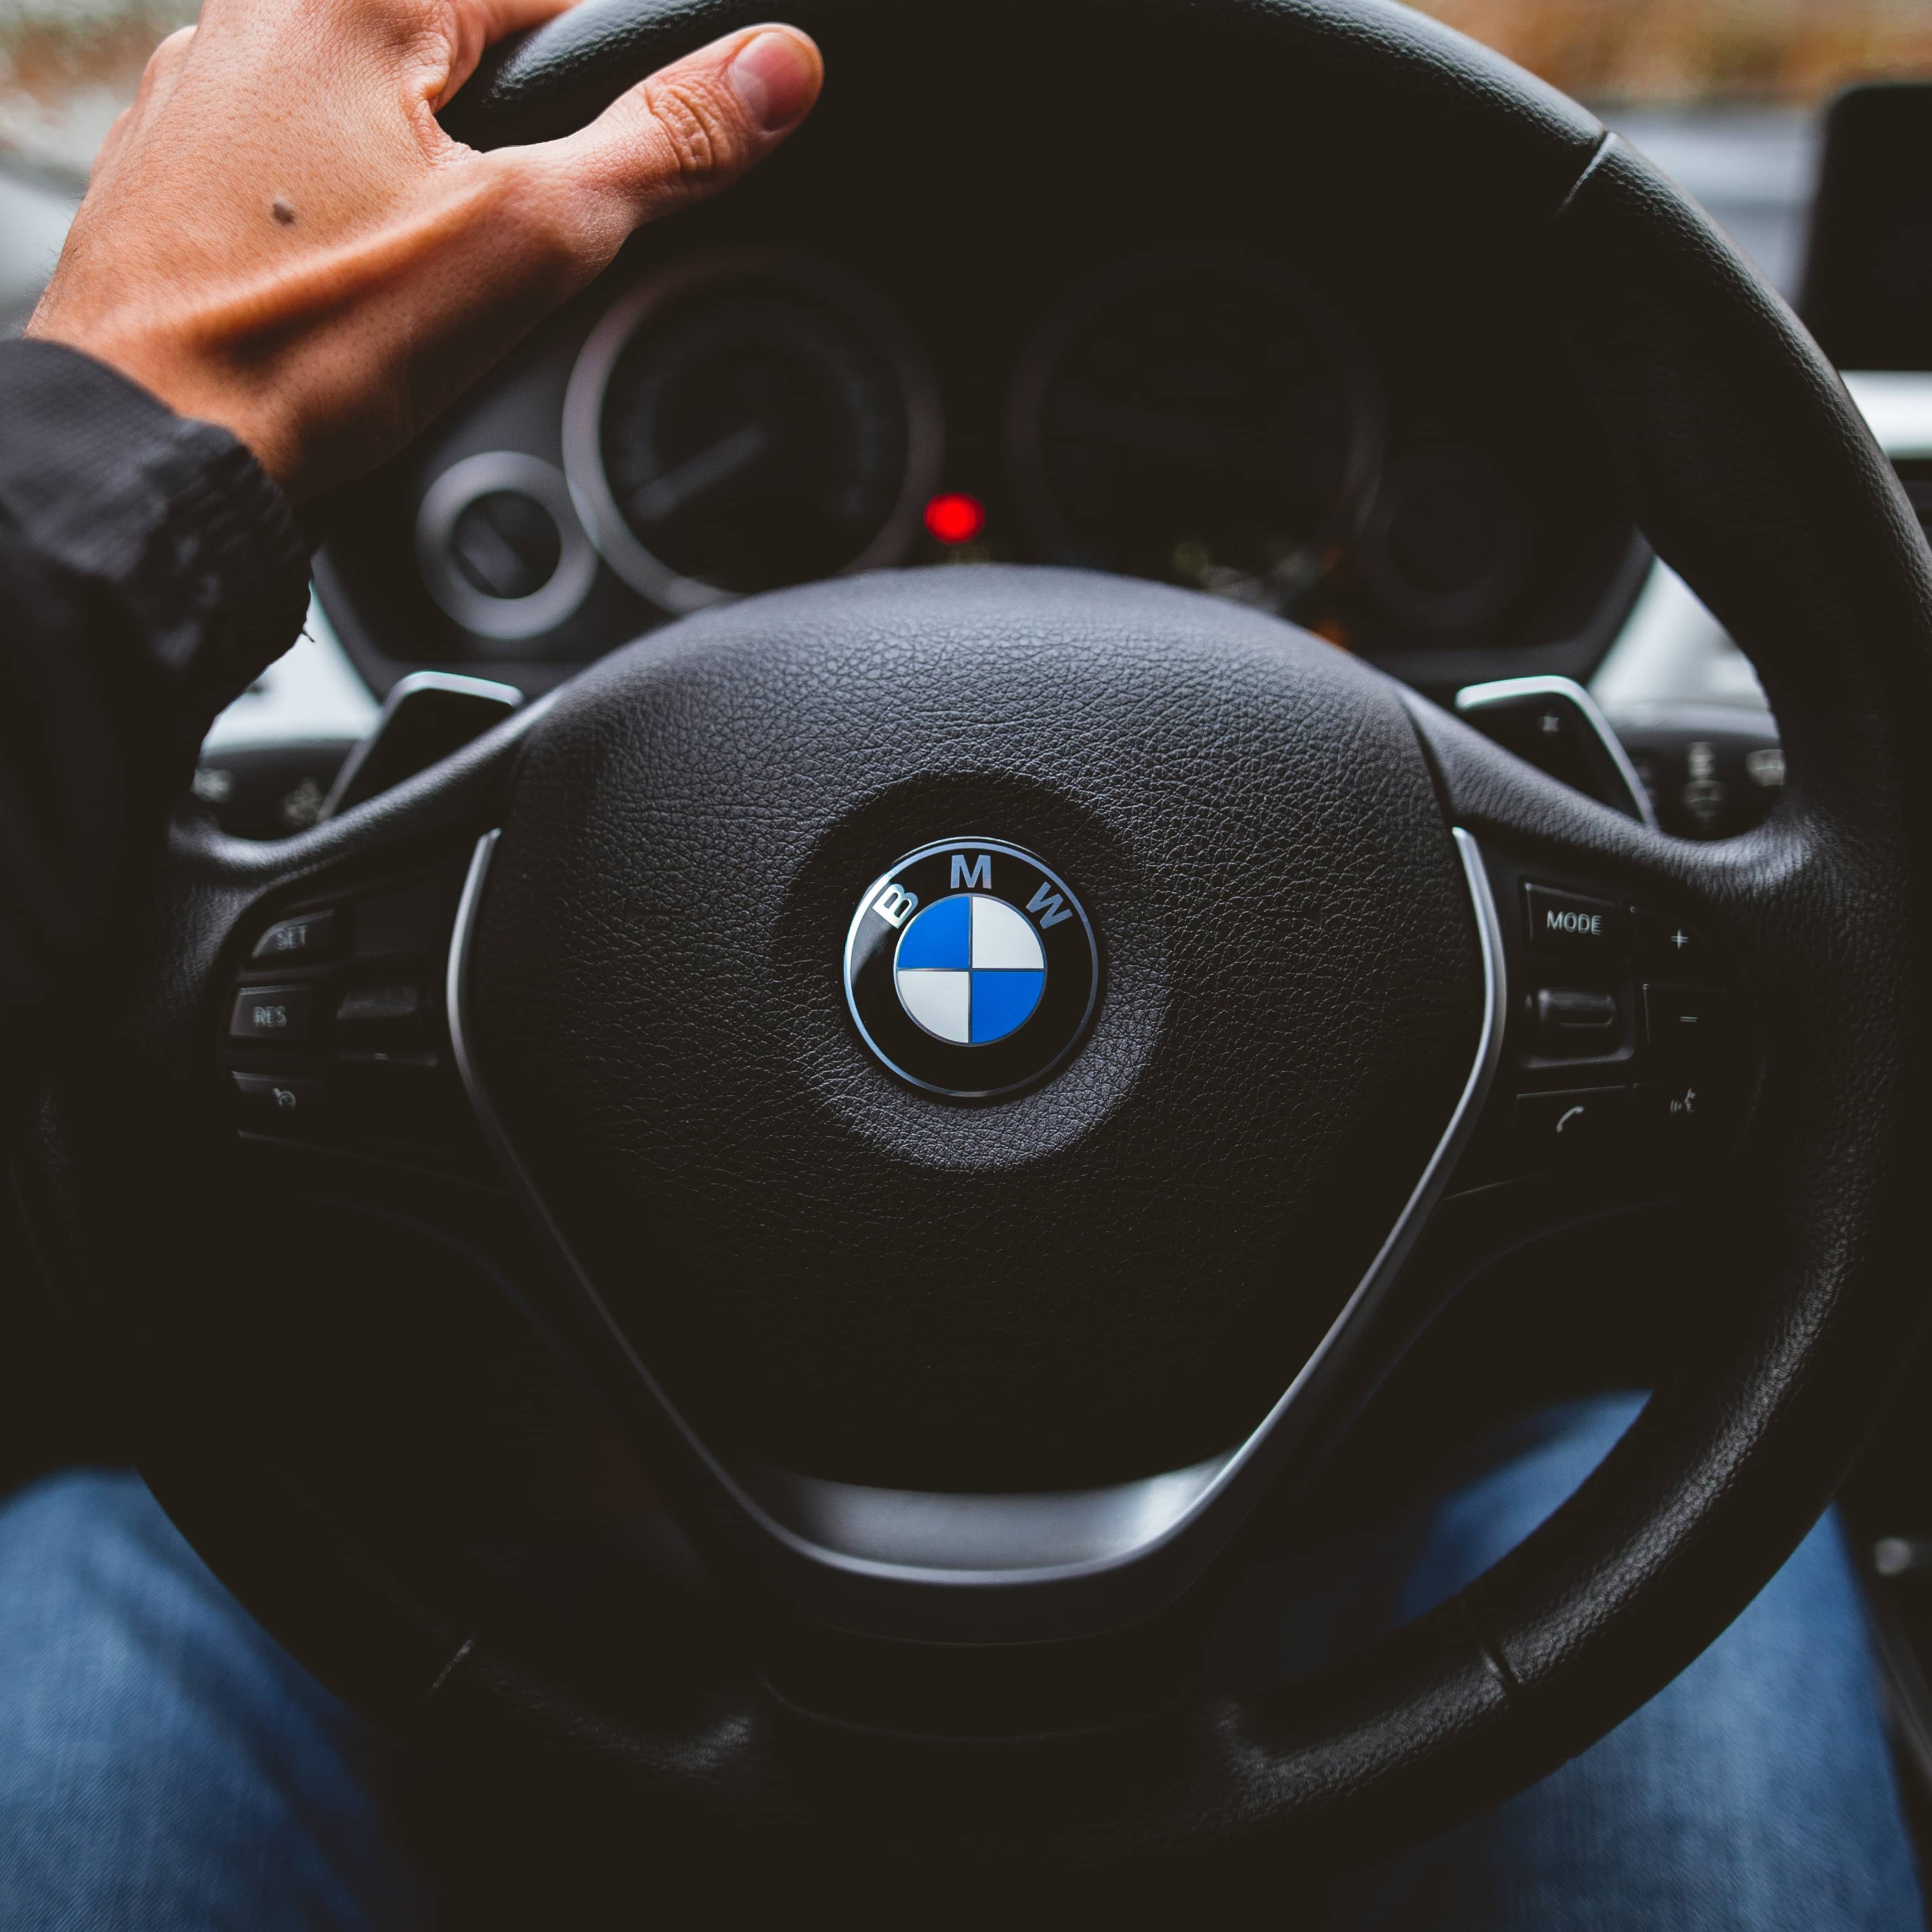 Steering wheel with BMW logo. A driver's left hand is on the wheel.